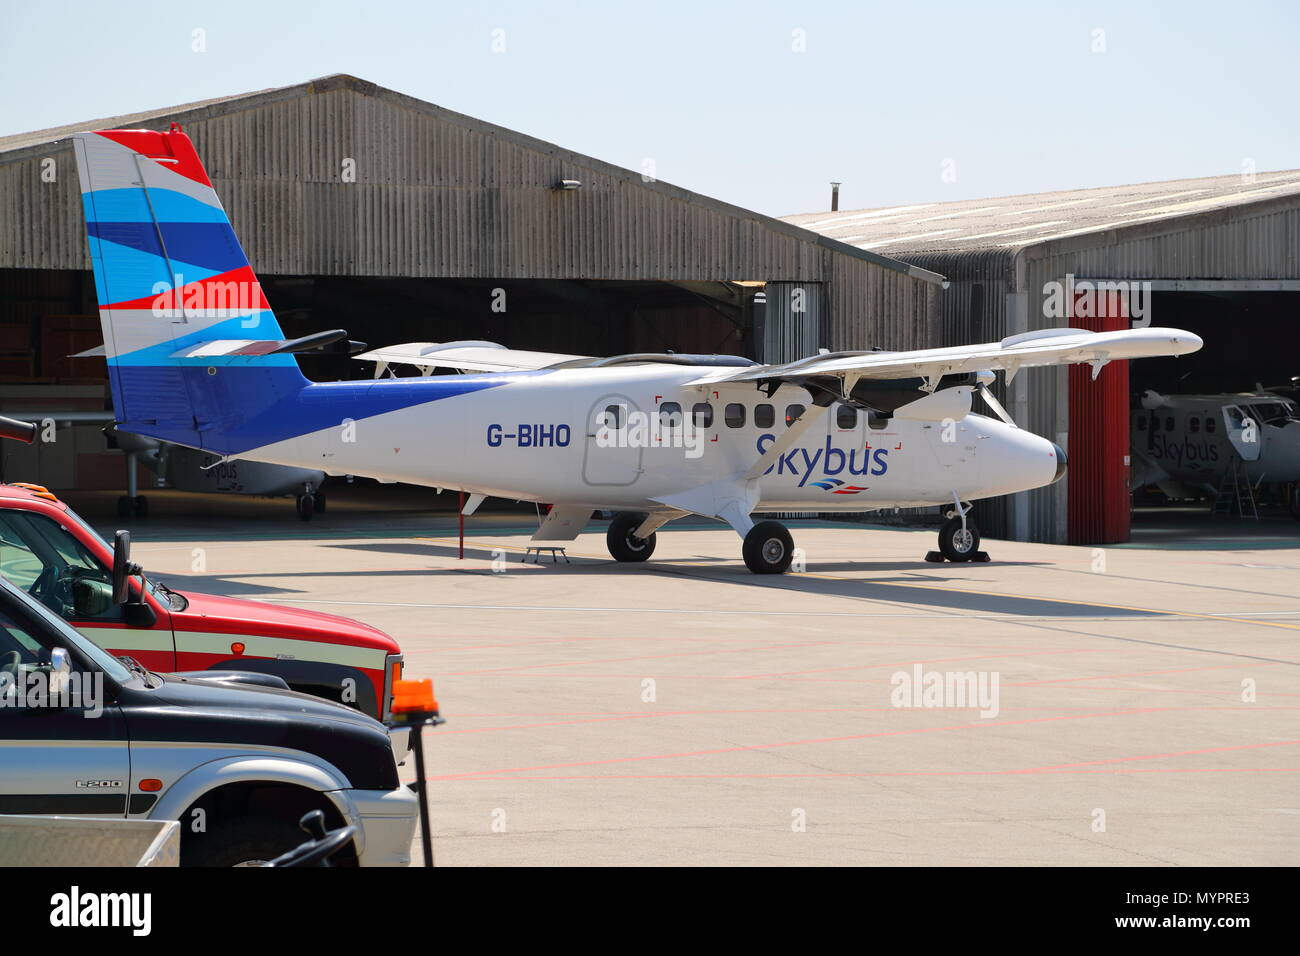 A Skybus Britten-Norman BN-2B G-BIHO at Lands End Airport, Cornwall, UK Stock Photo